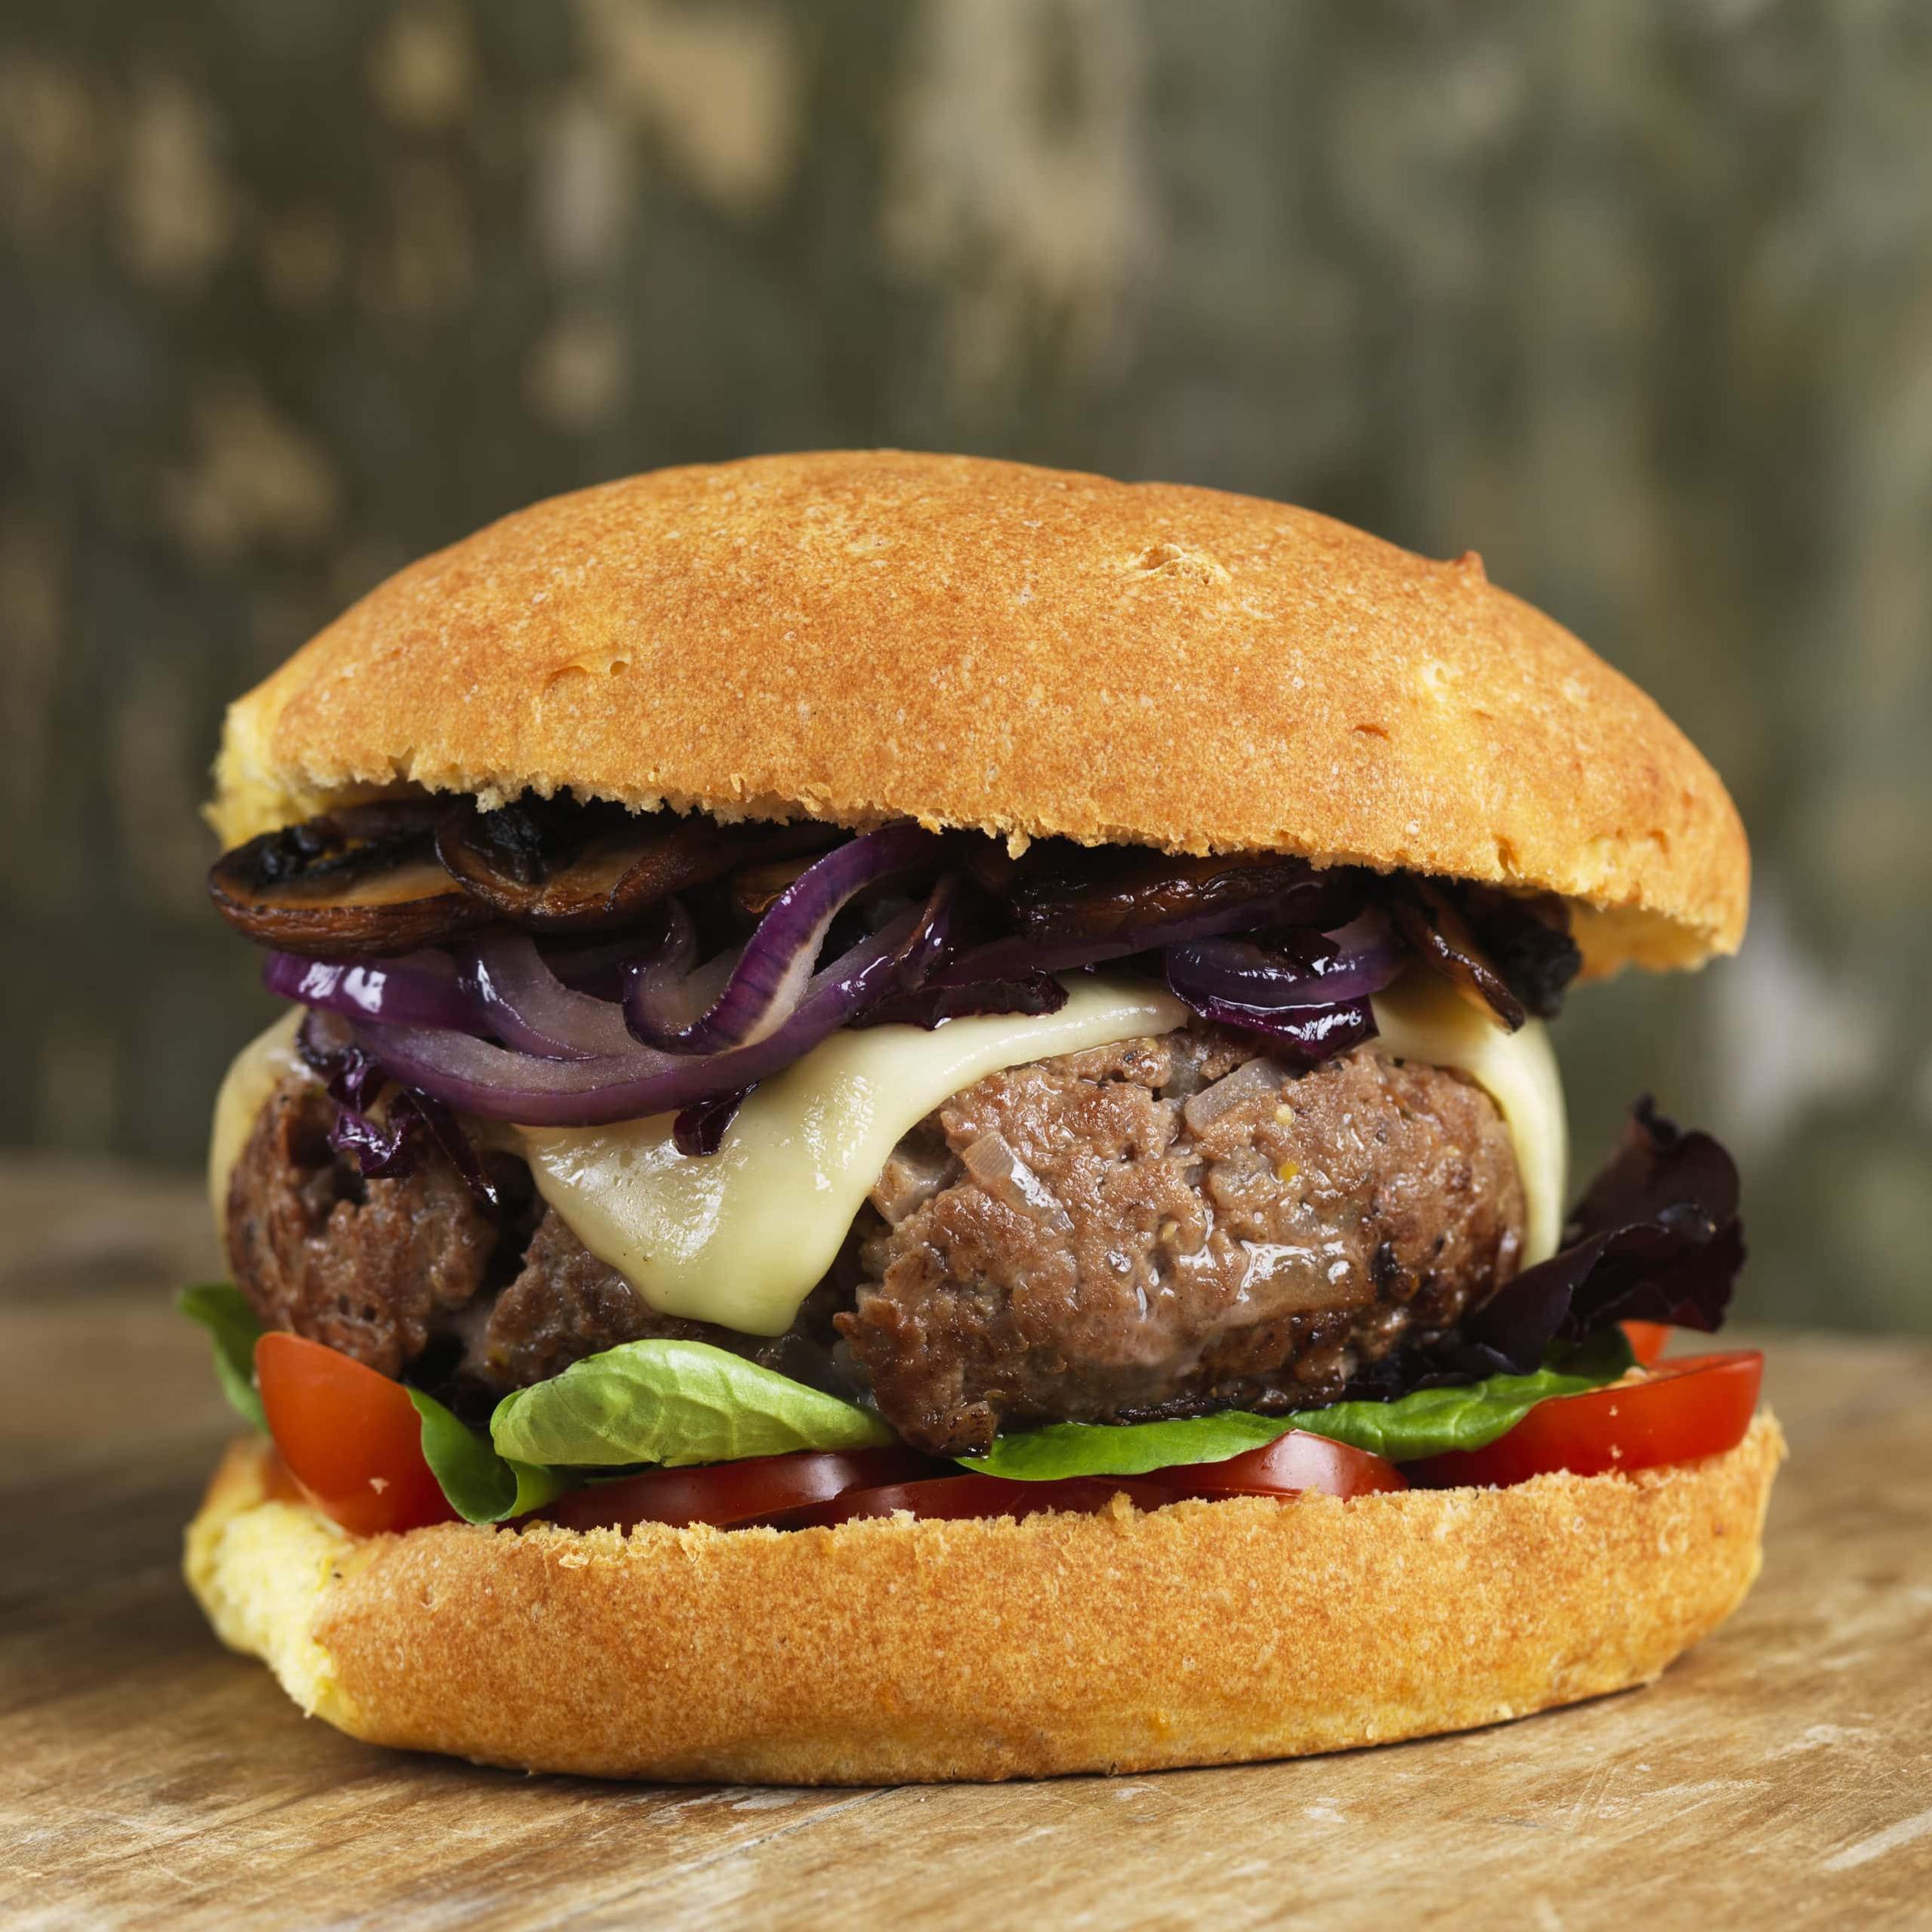  Get ready to feast your eyes on these delicious gluten-free grilled burgers!